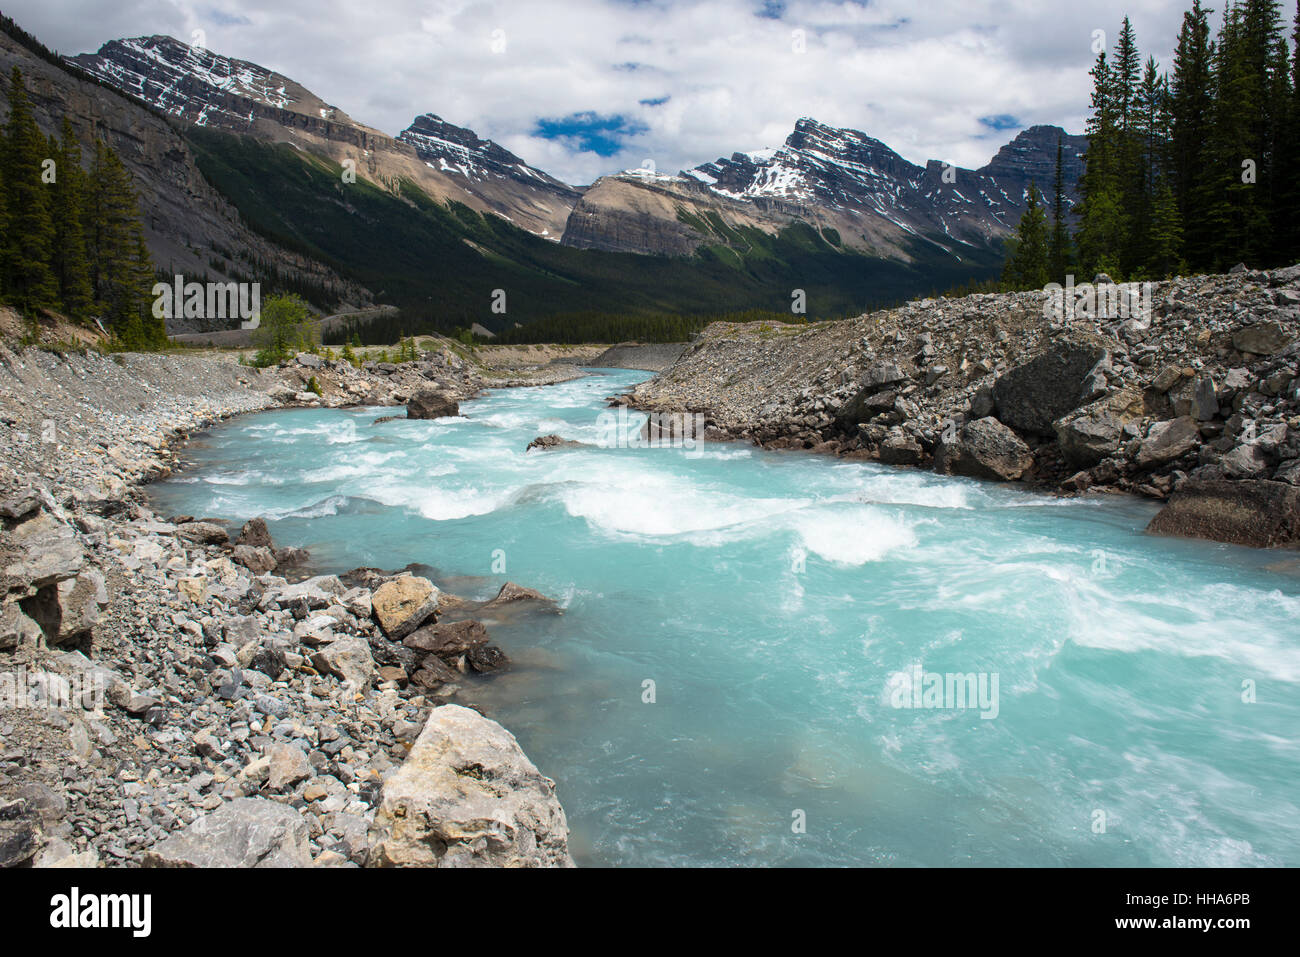 Glacial melt feeding the Athabasca River; Icefield Parkway and Columbia Icefield in Jasper National Park, Alberta, Canada Stock Photo